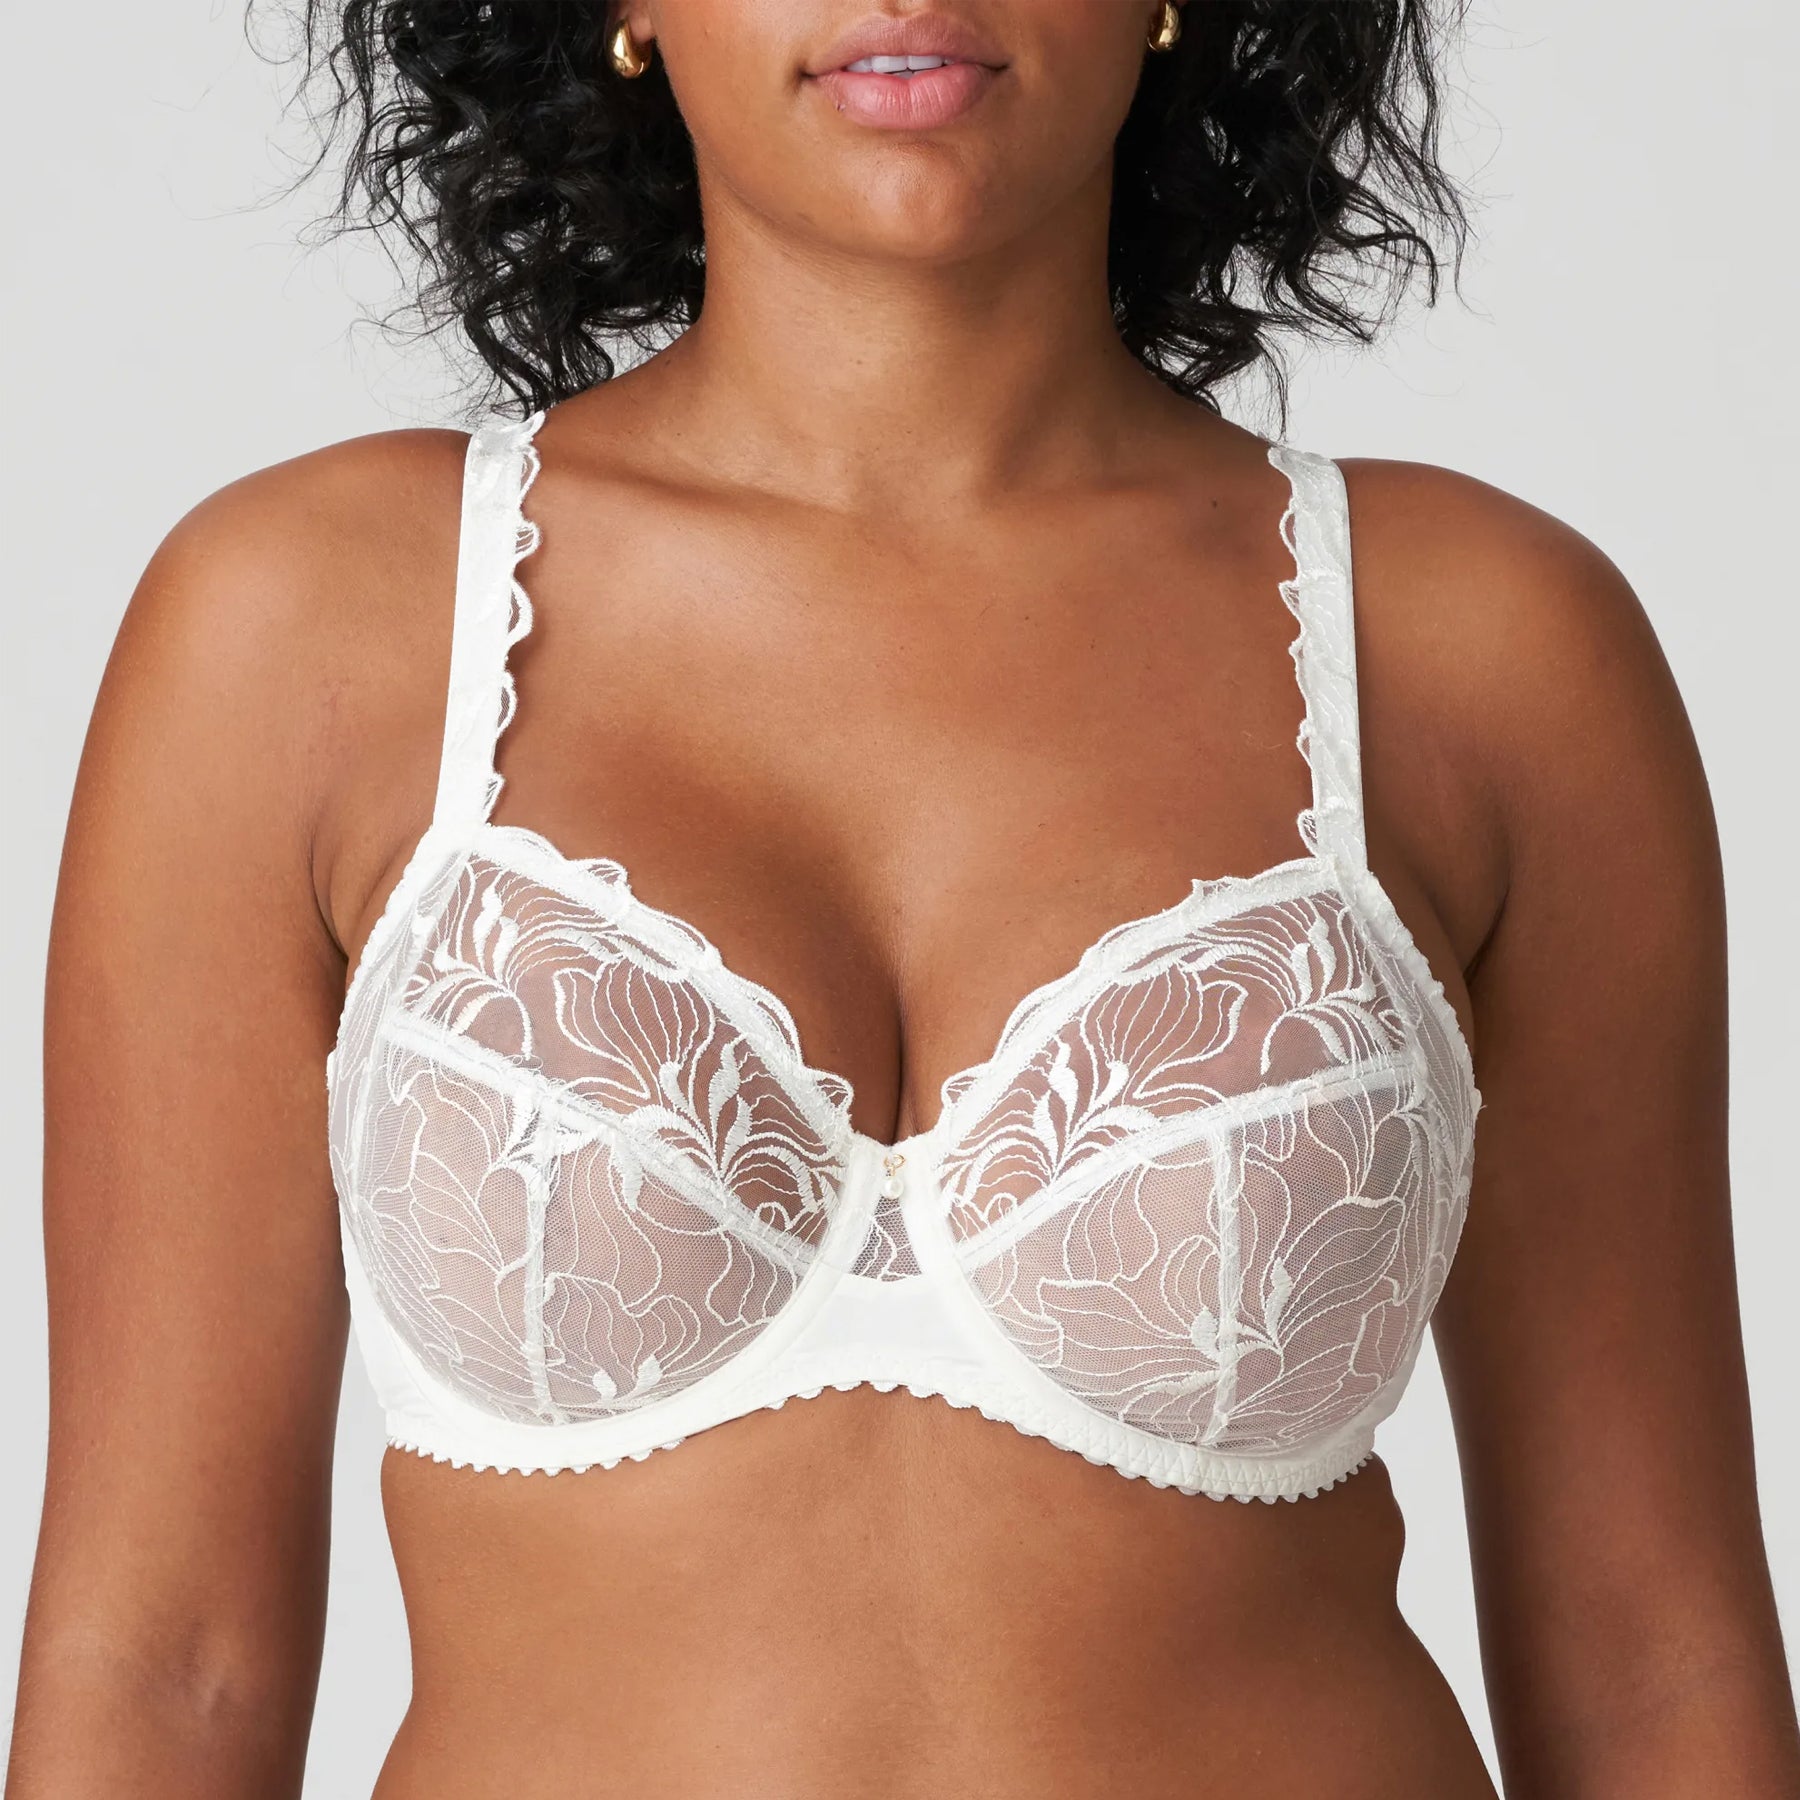 La Moda Wear - Barely There Be Free Seamless Bra – Size A to C Cup -  Everyday Comfort Bra for Women